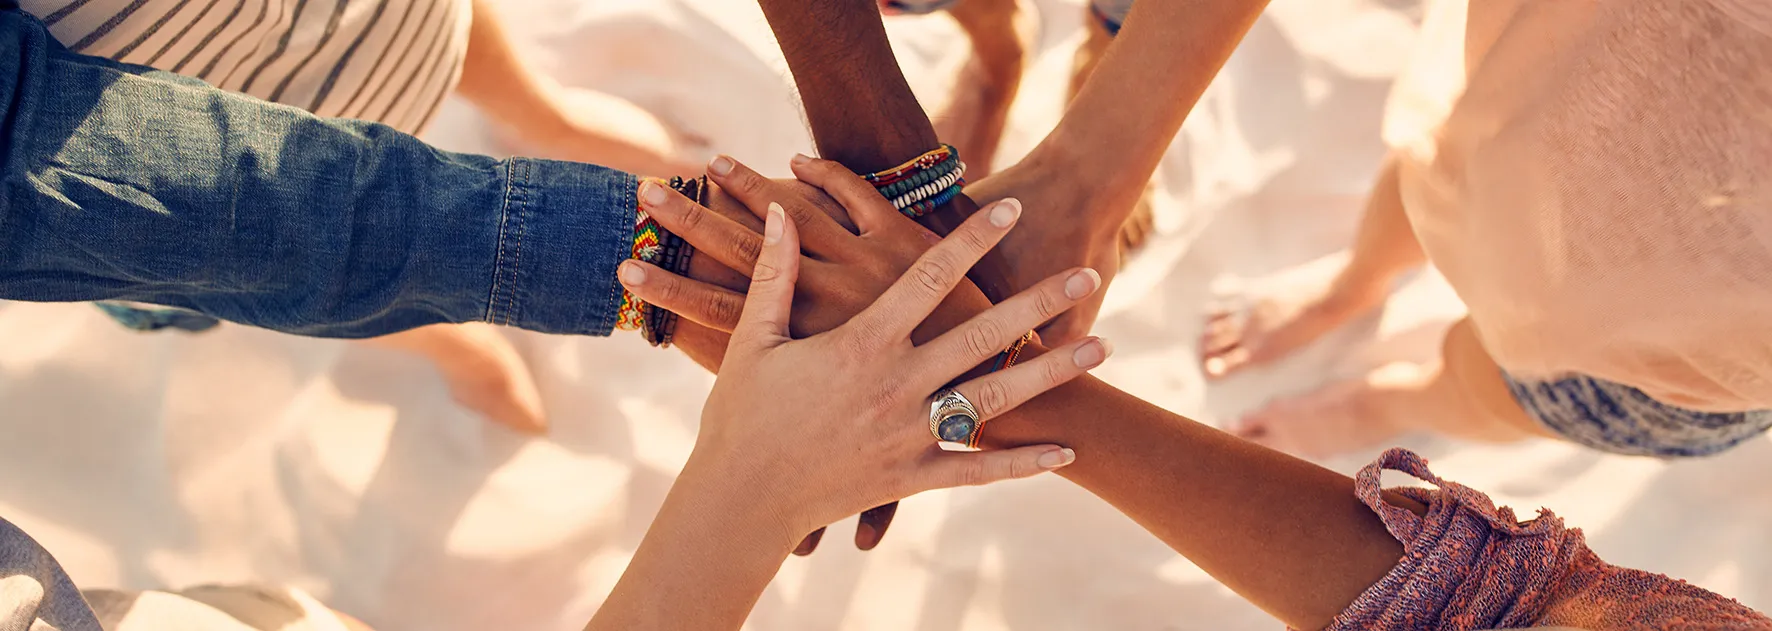 Image of a group of people with their hands stacked in the center on the beach.